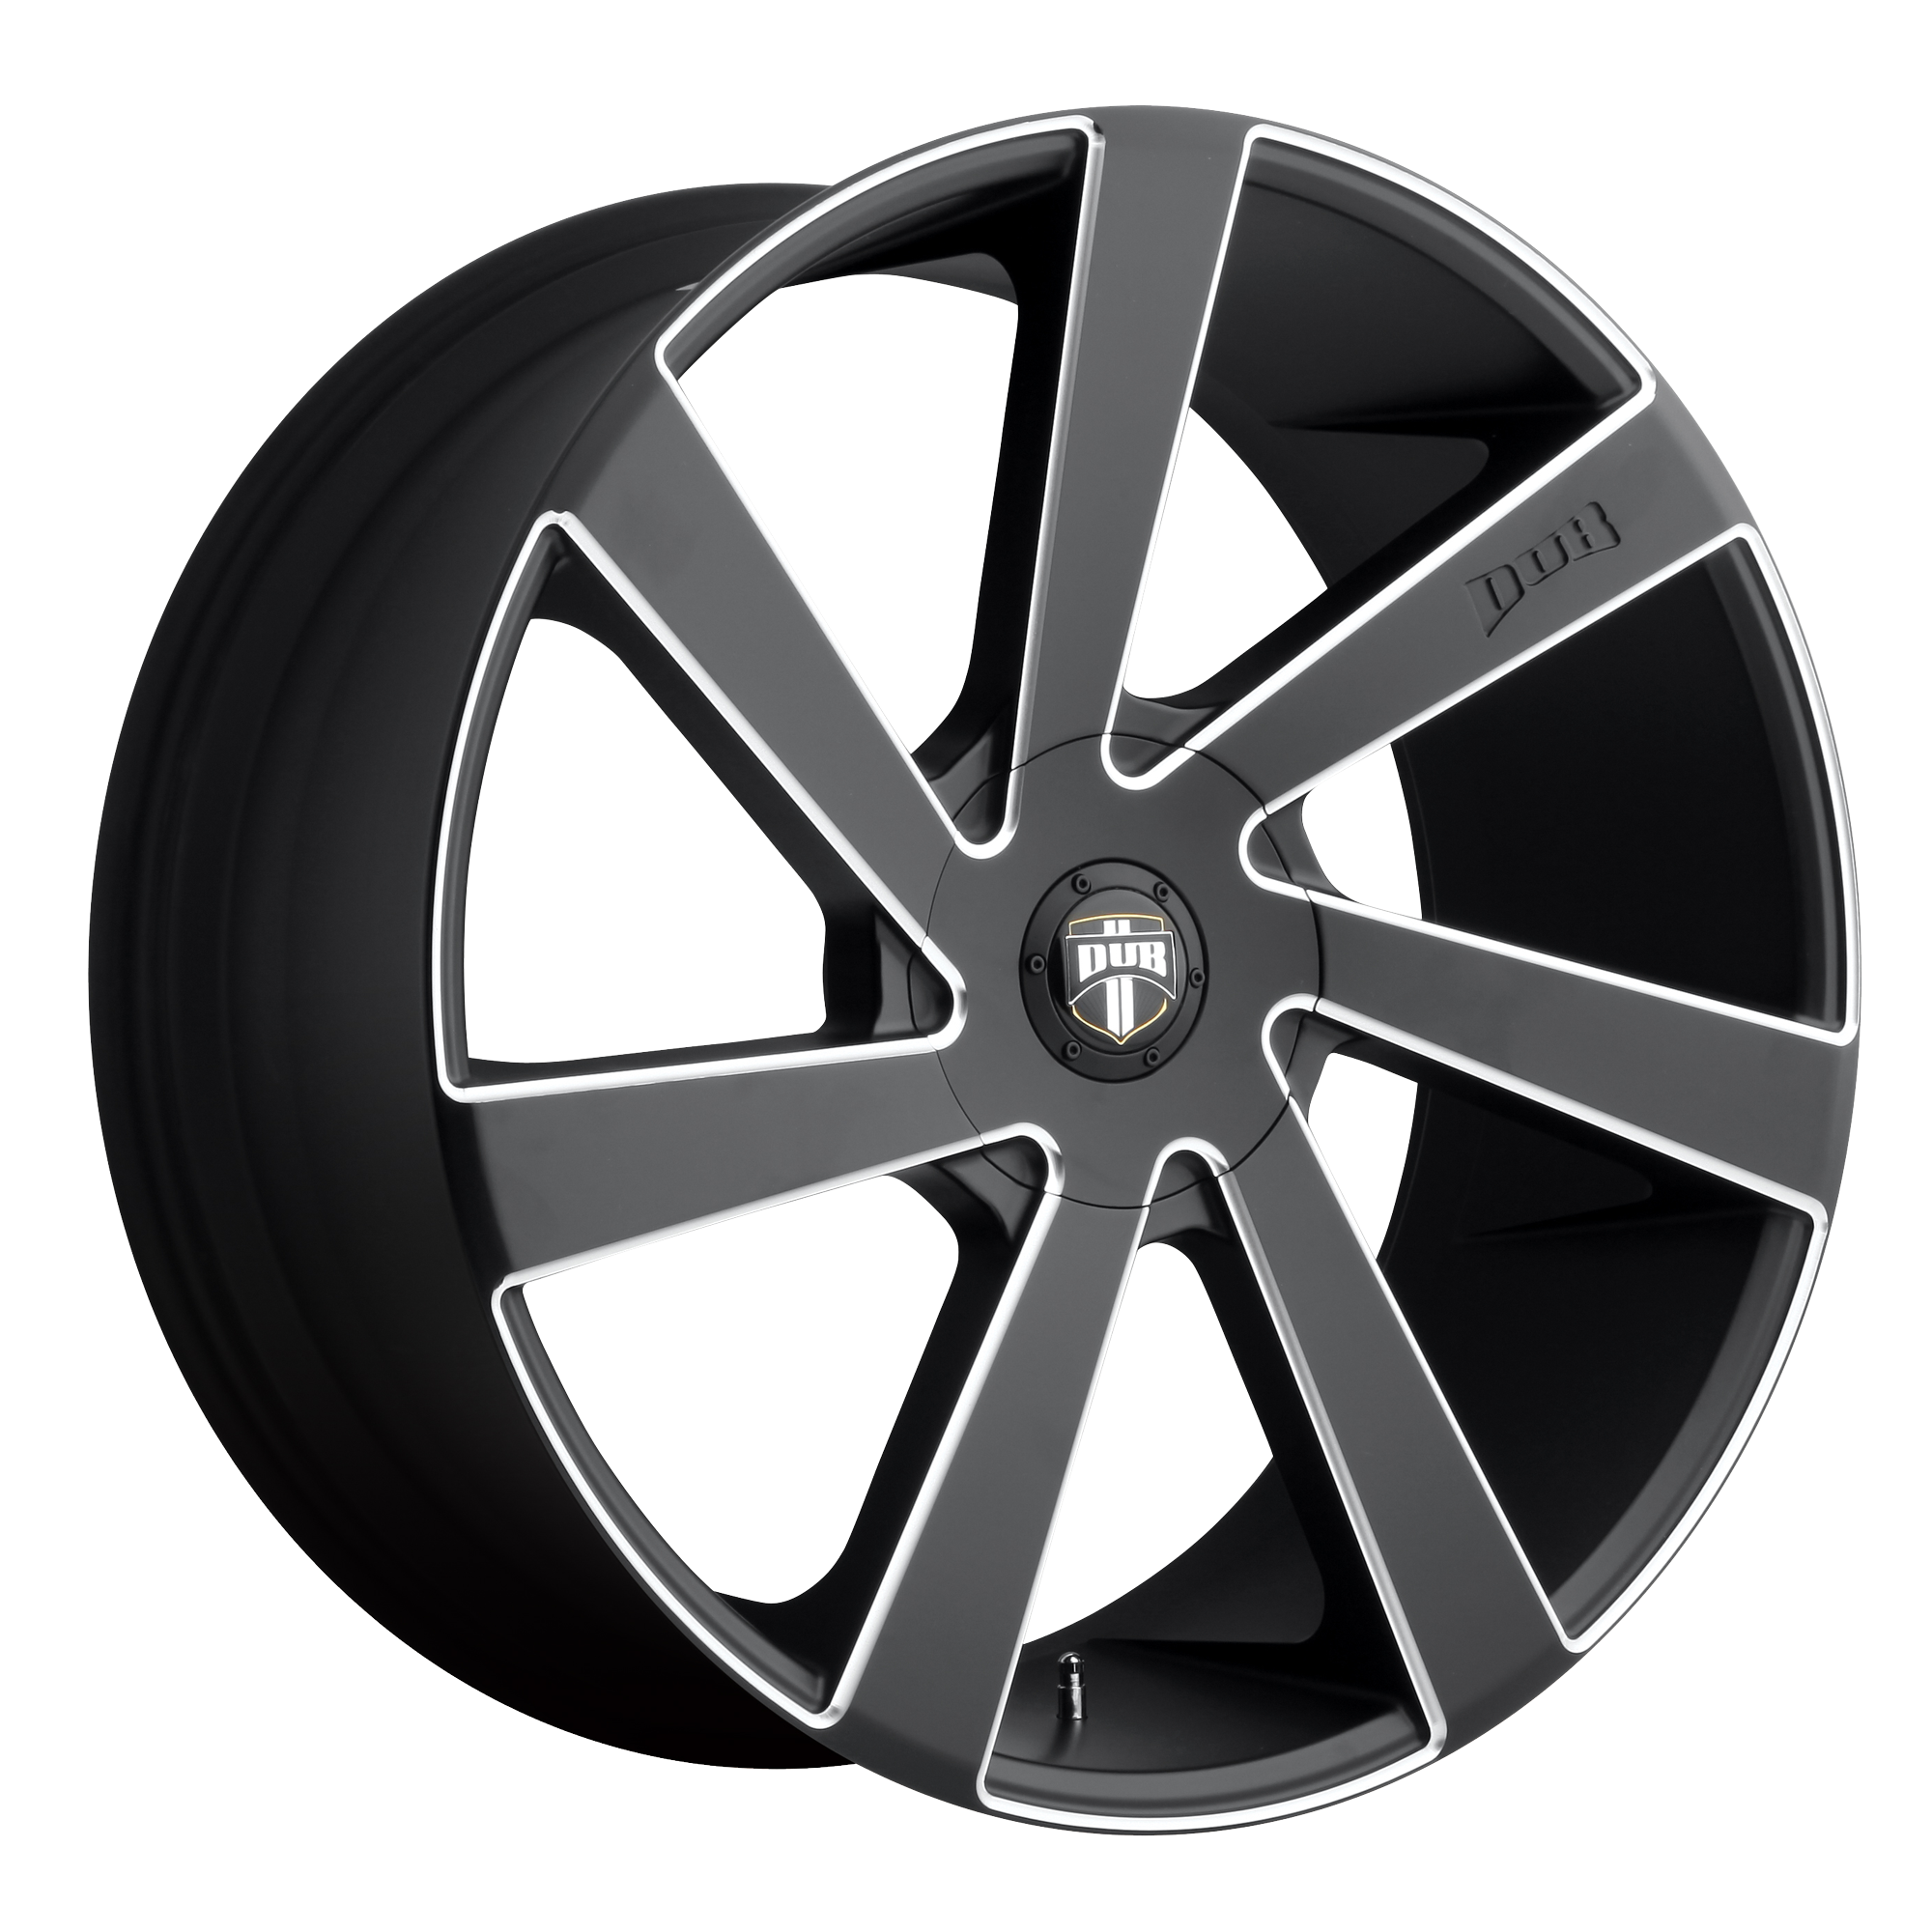 DIRECTA 22x9.5 6x135.00/6x139.70 MATTE BLACK MILLED (30 mm) - Tires and Engine Performance